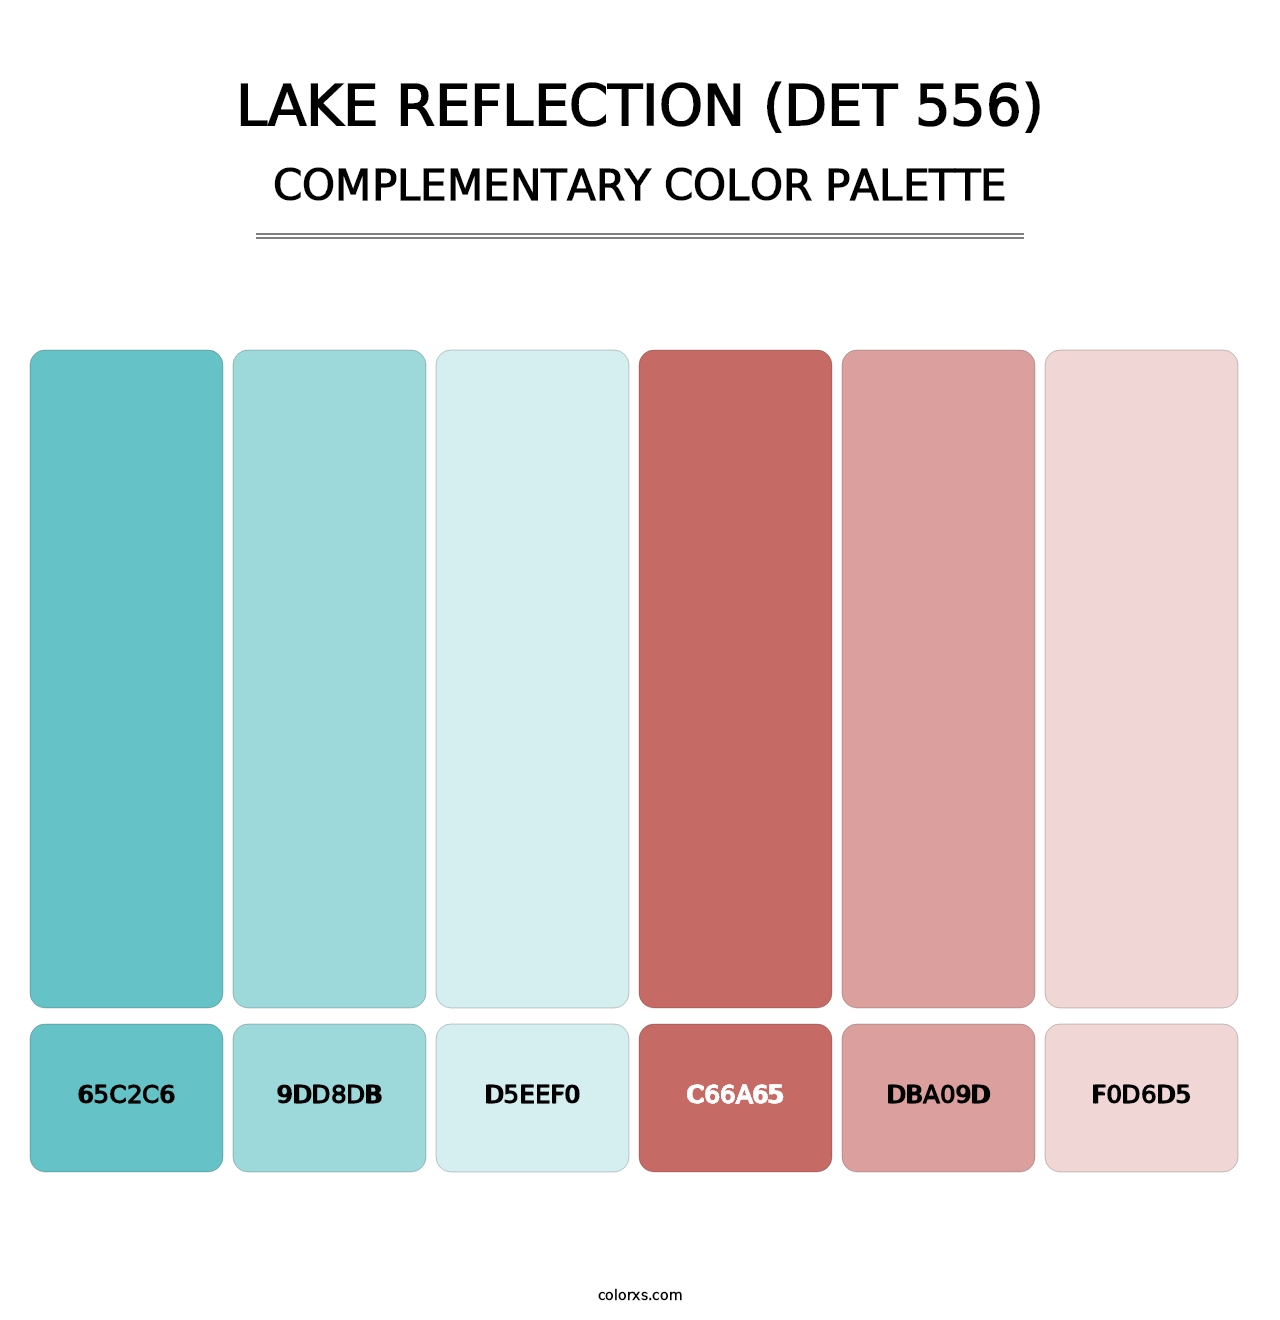 Lake Reflection (DET 556) - Complementary Color Palette